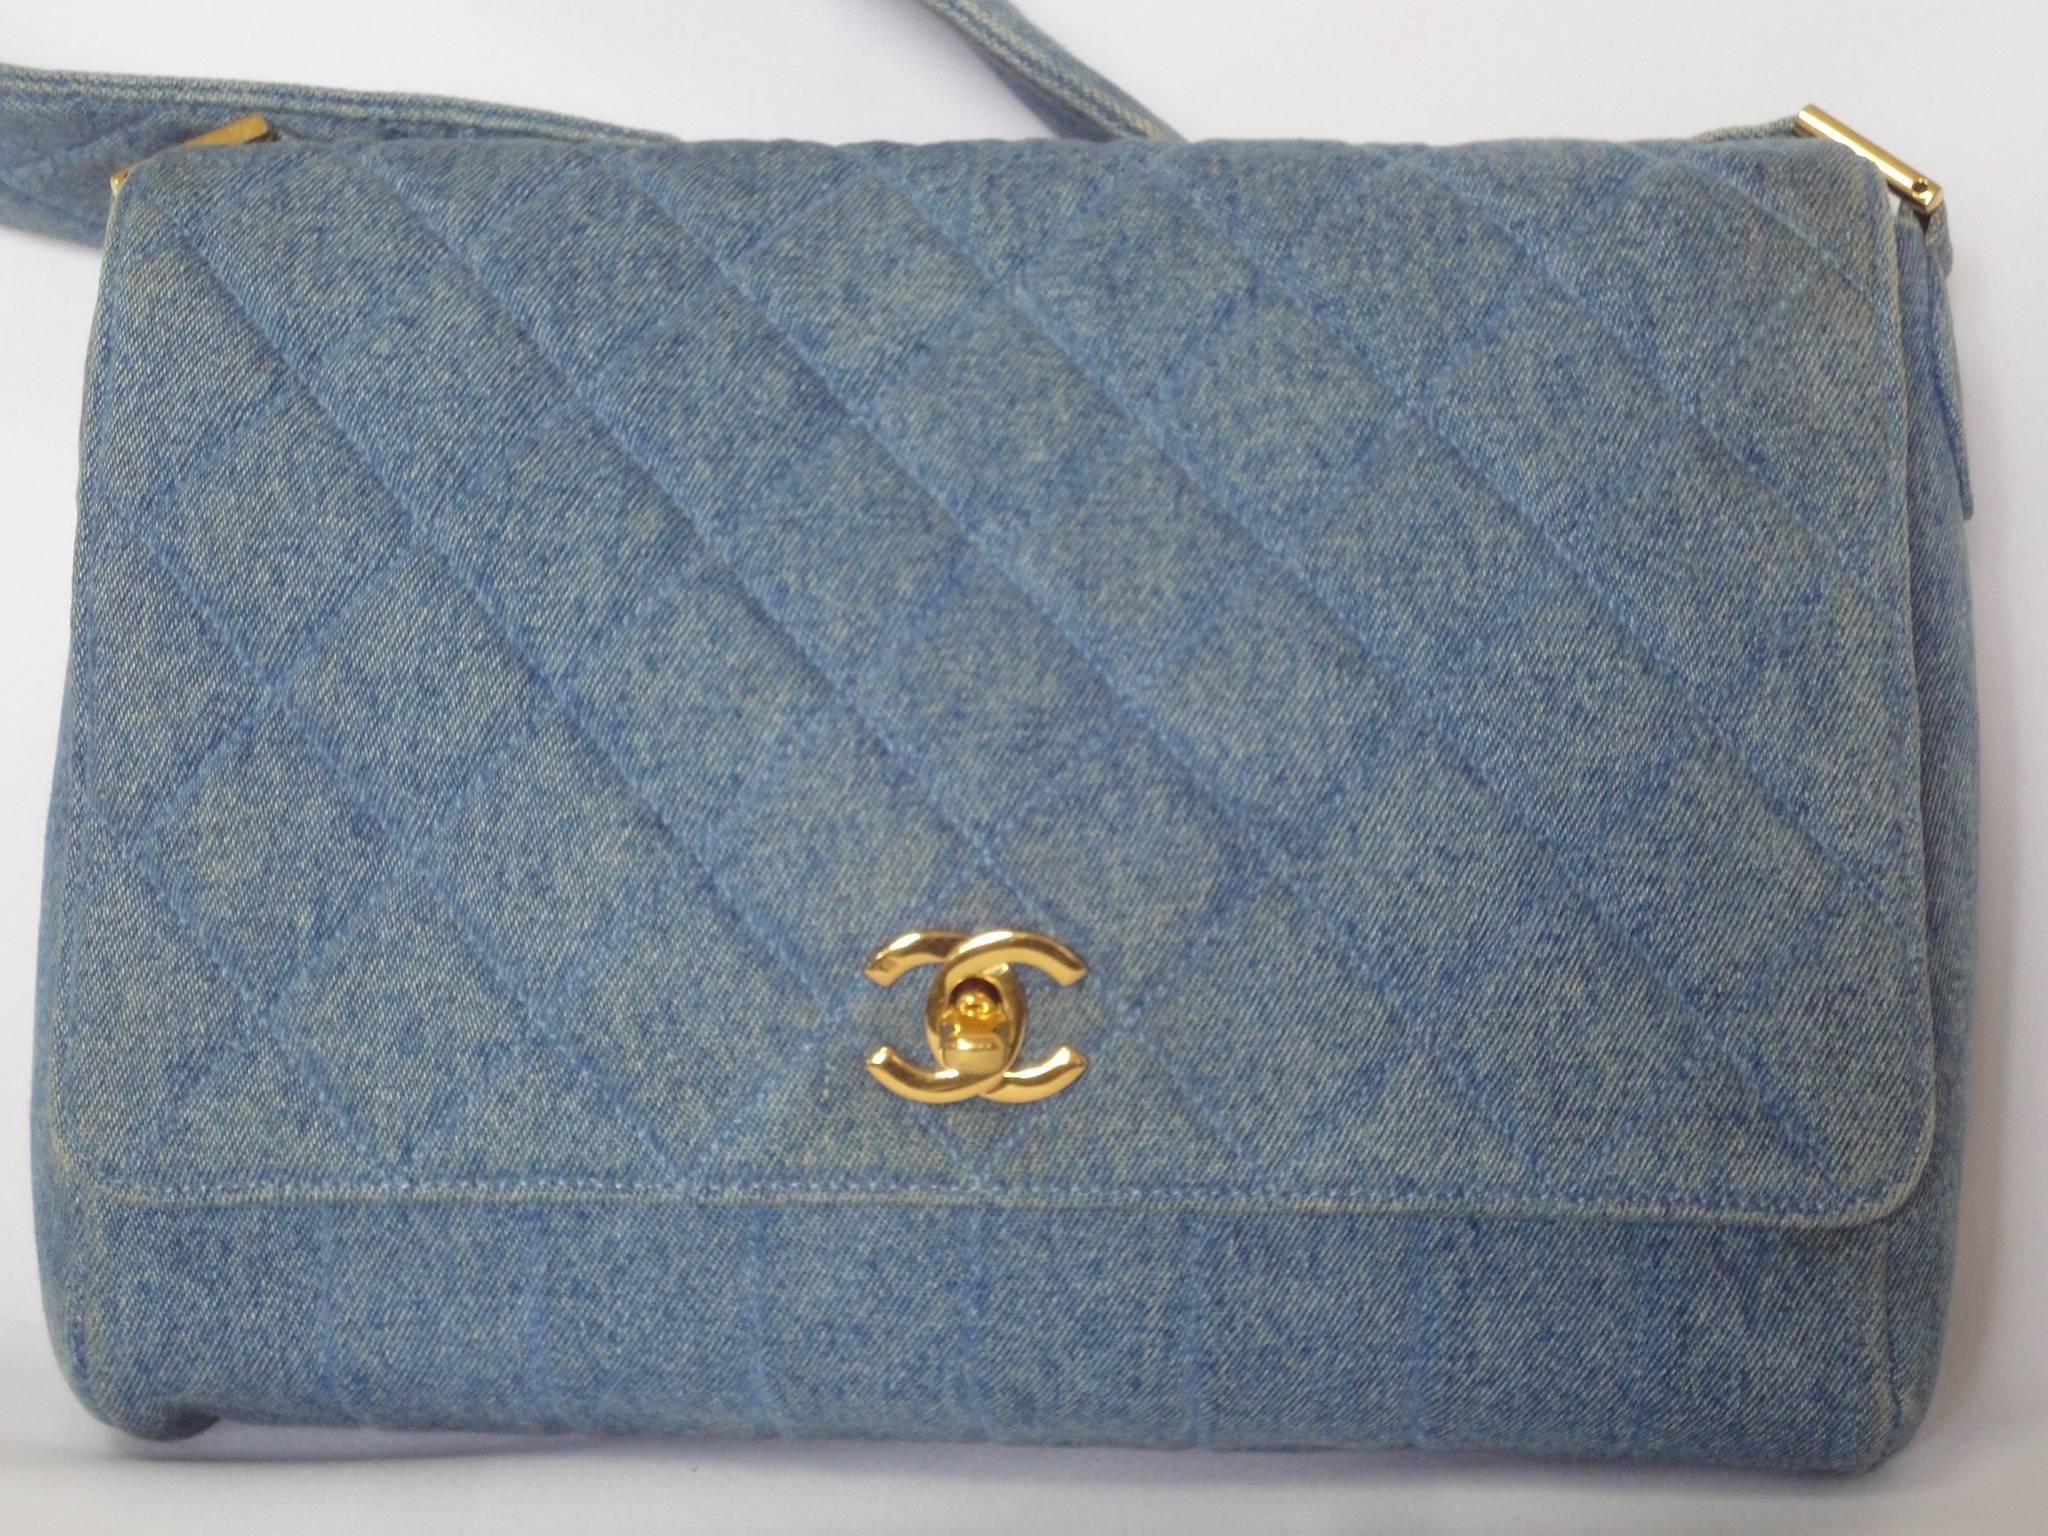 This is a vintage CHANEL denim shoulder bag, handbag with vertical stitches and golden CC closure. 

The denim surface is nice and washed off as great denim vintage piece as you can see the photos.
Great CHANEL bag for your daily use. 
Though